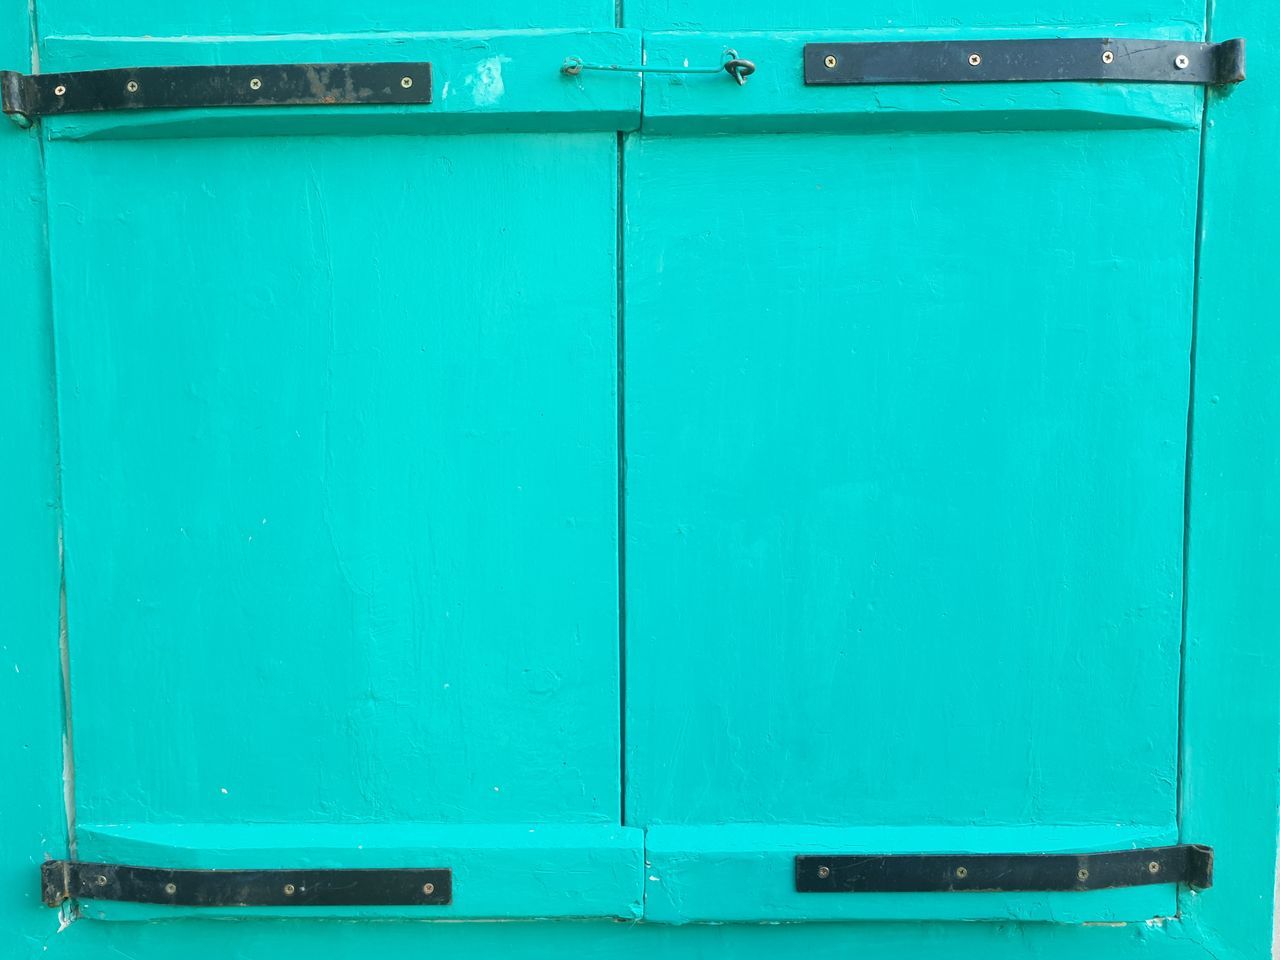 FULL FRAME SHOT OF BLUE METAL CONTAINER ON GREEN WALL